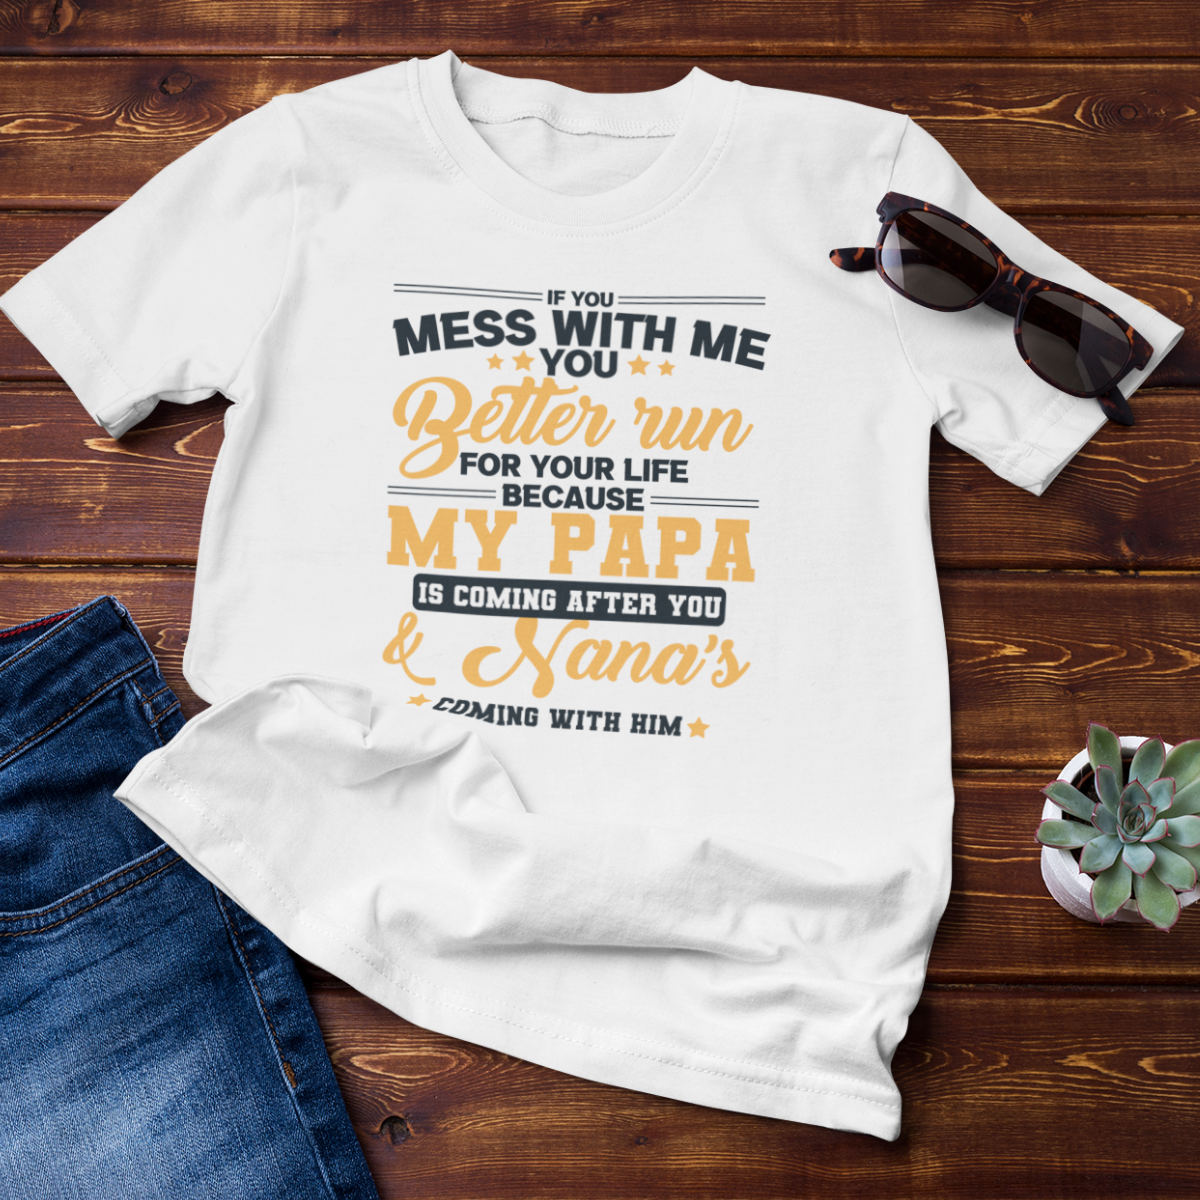 T-SHIRT - IF YOU MESS WITH ME YOU BETTER RUN FOR YOUR LIFE.